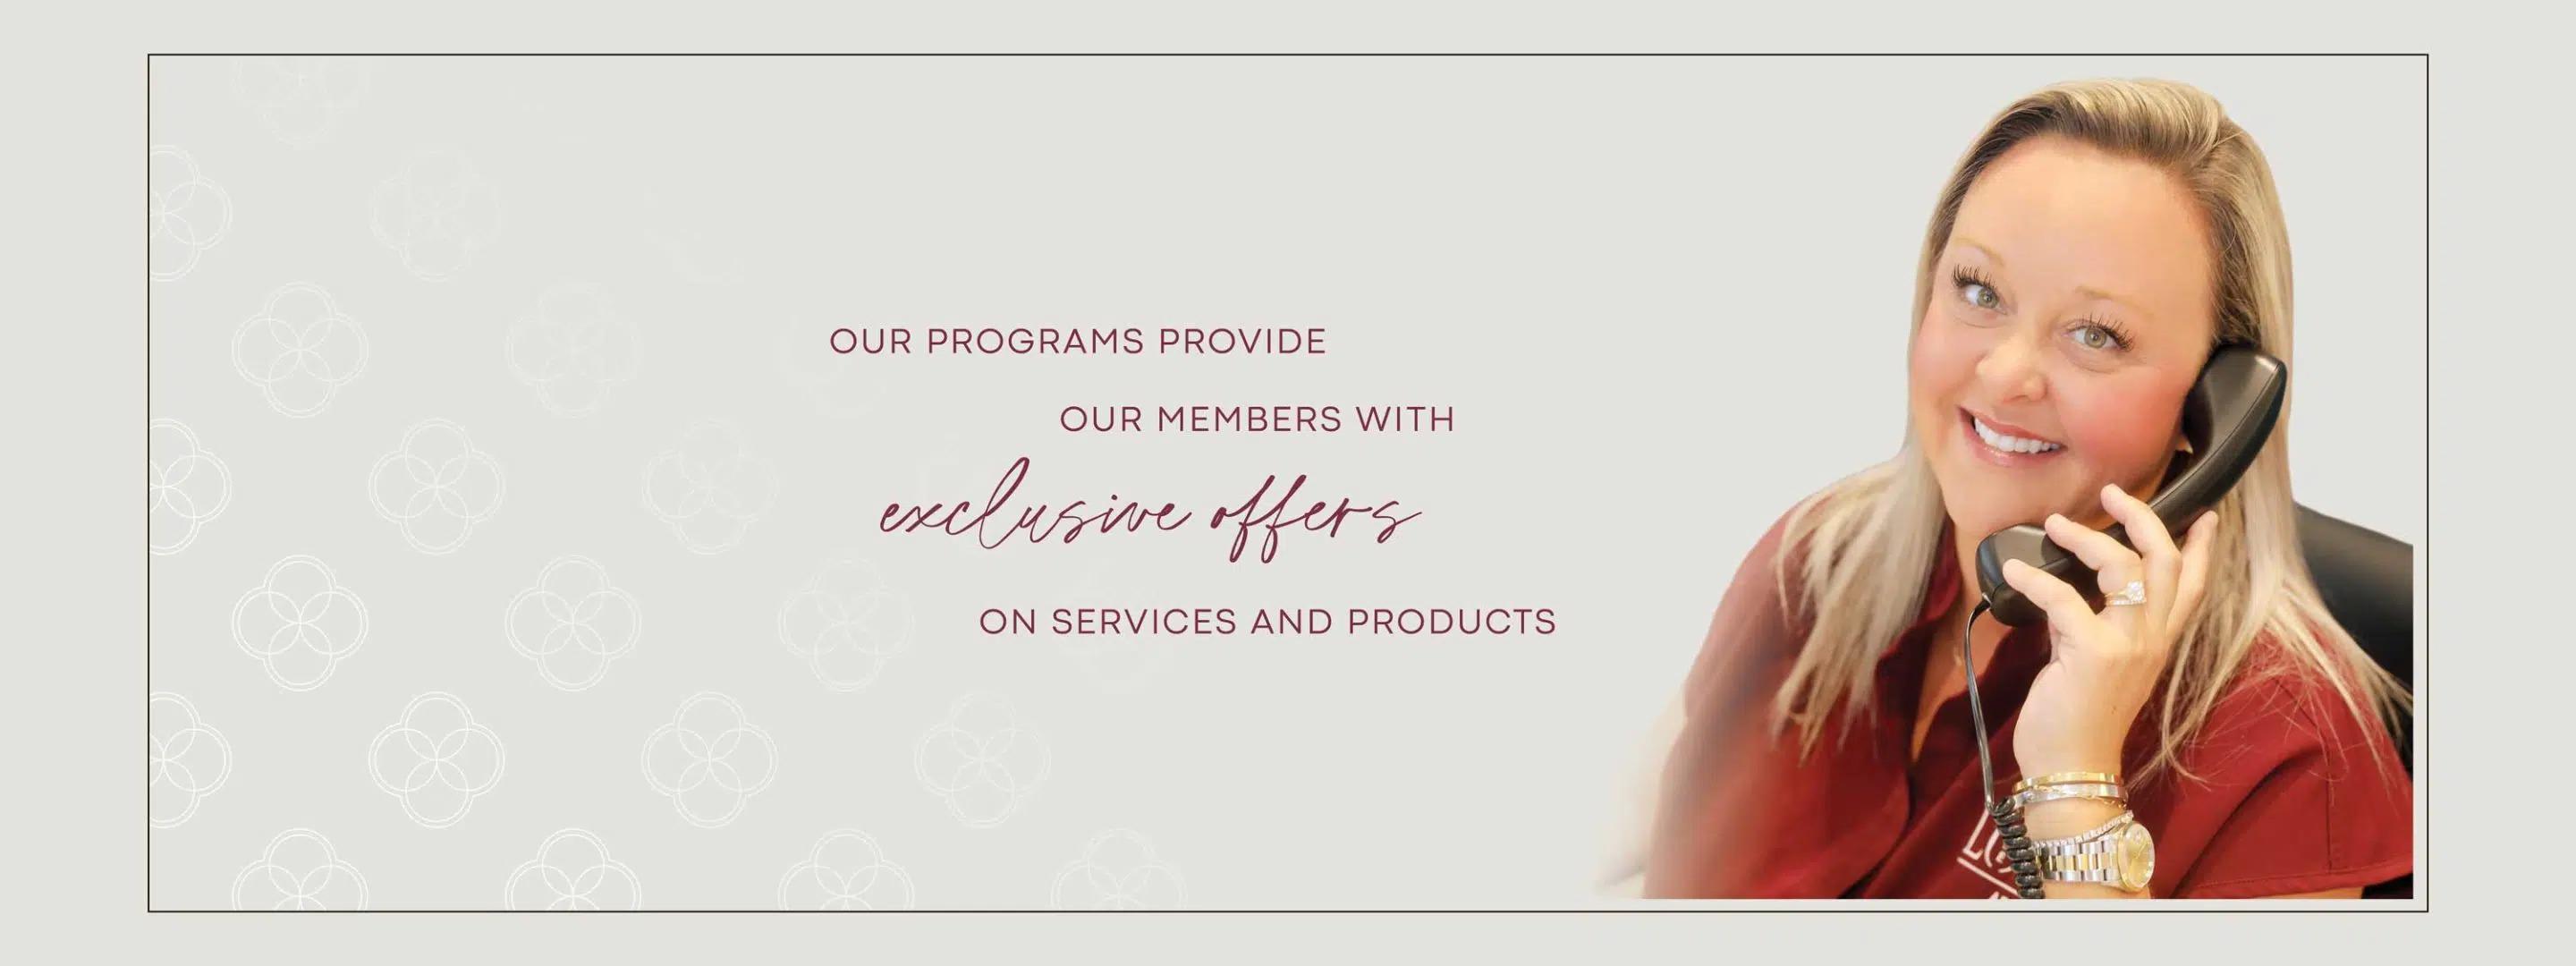 Are you ready for exclusive access?
The Look Skin Tribe is a membership-based program providing exclusive offers on our most sought-after products and services. Simply stop into the office to sign up.